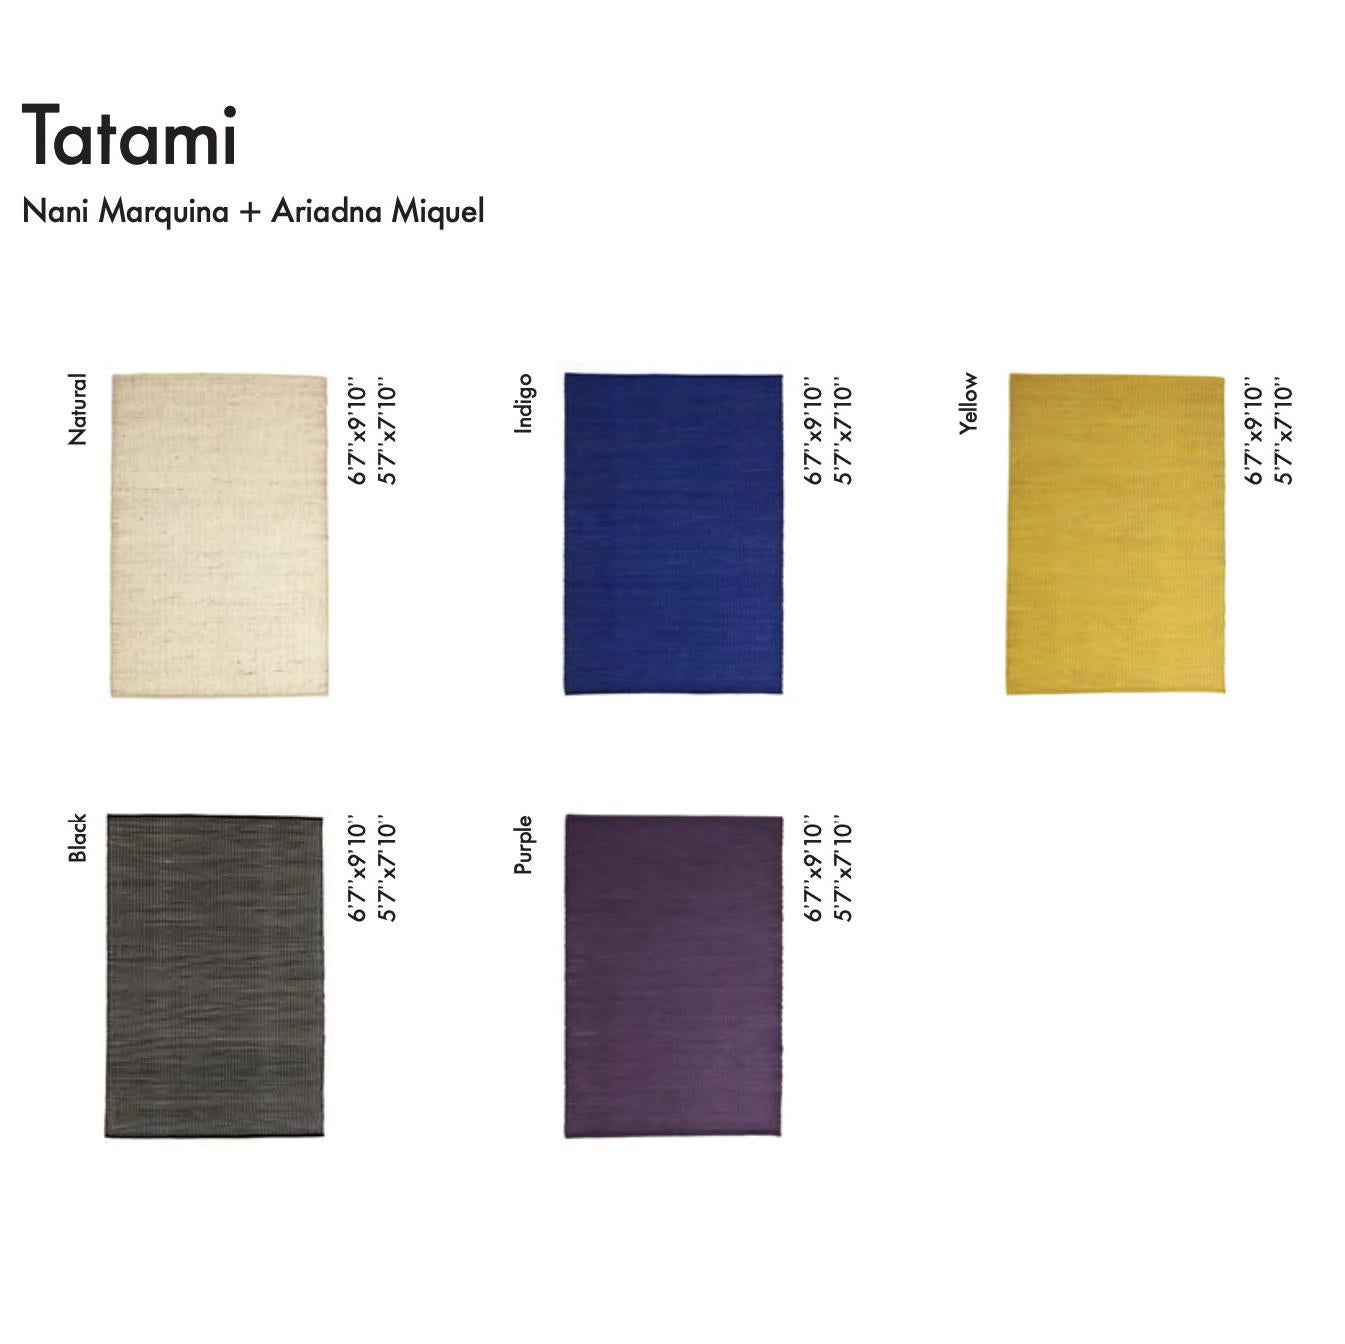 Large 'Tatami' Rug by Ariadna Miquel and Nani Marquina for Nanimarquina For Sale 4